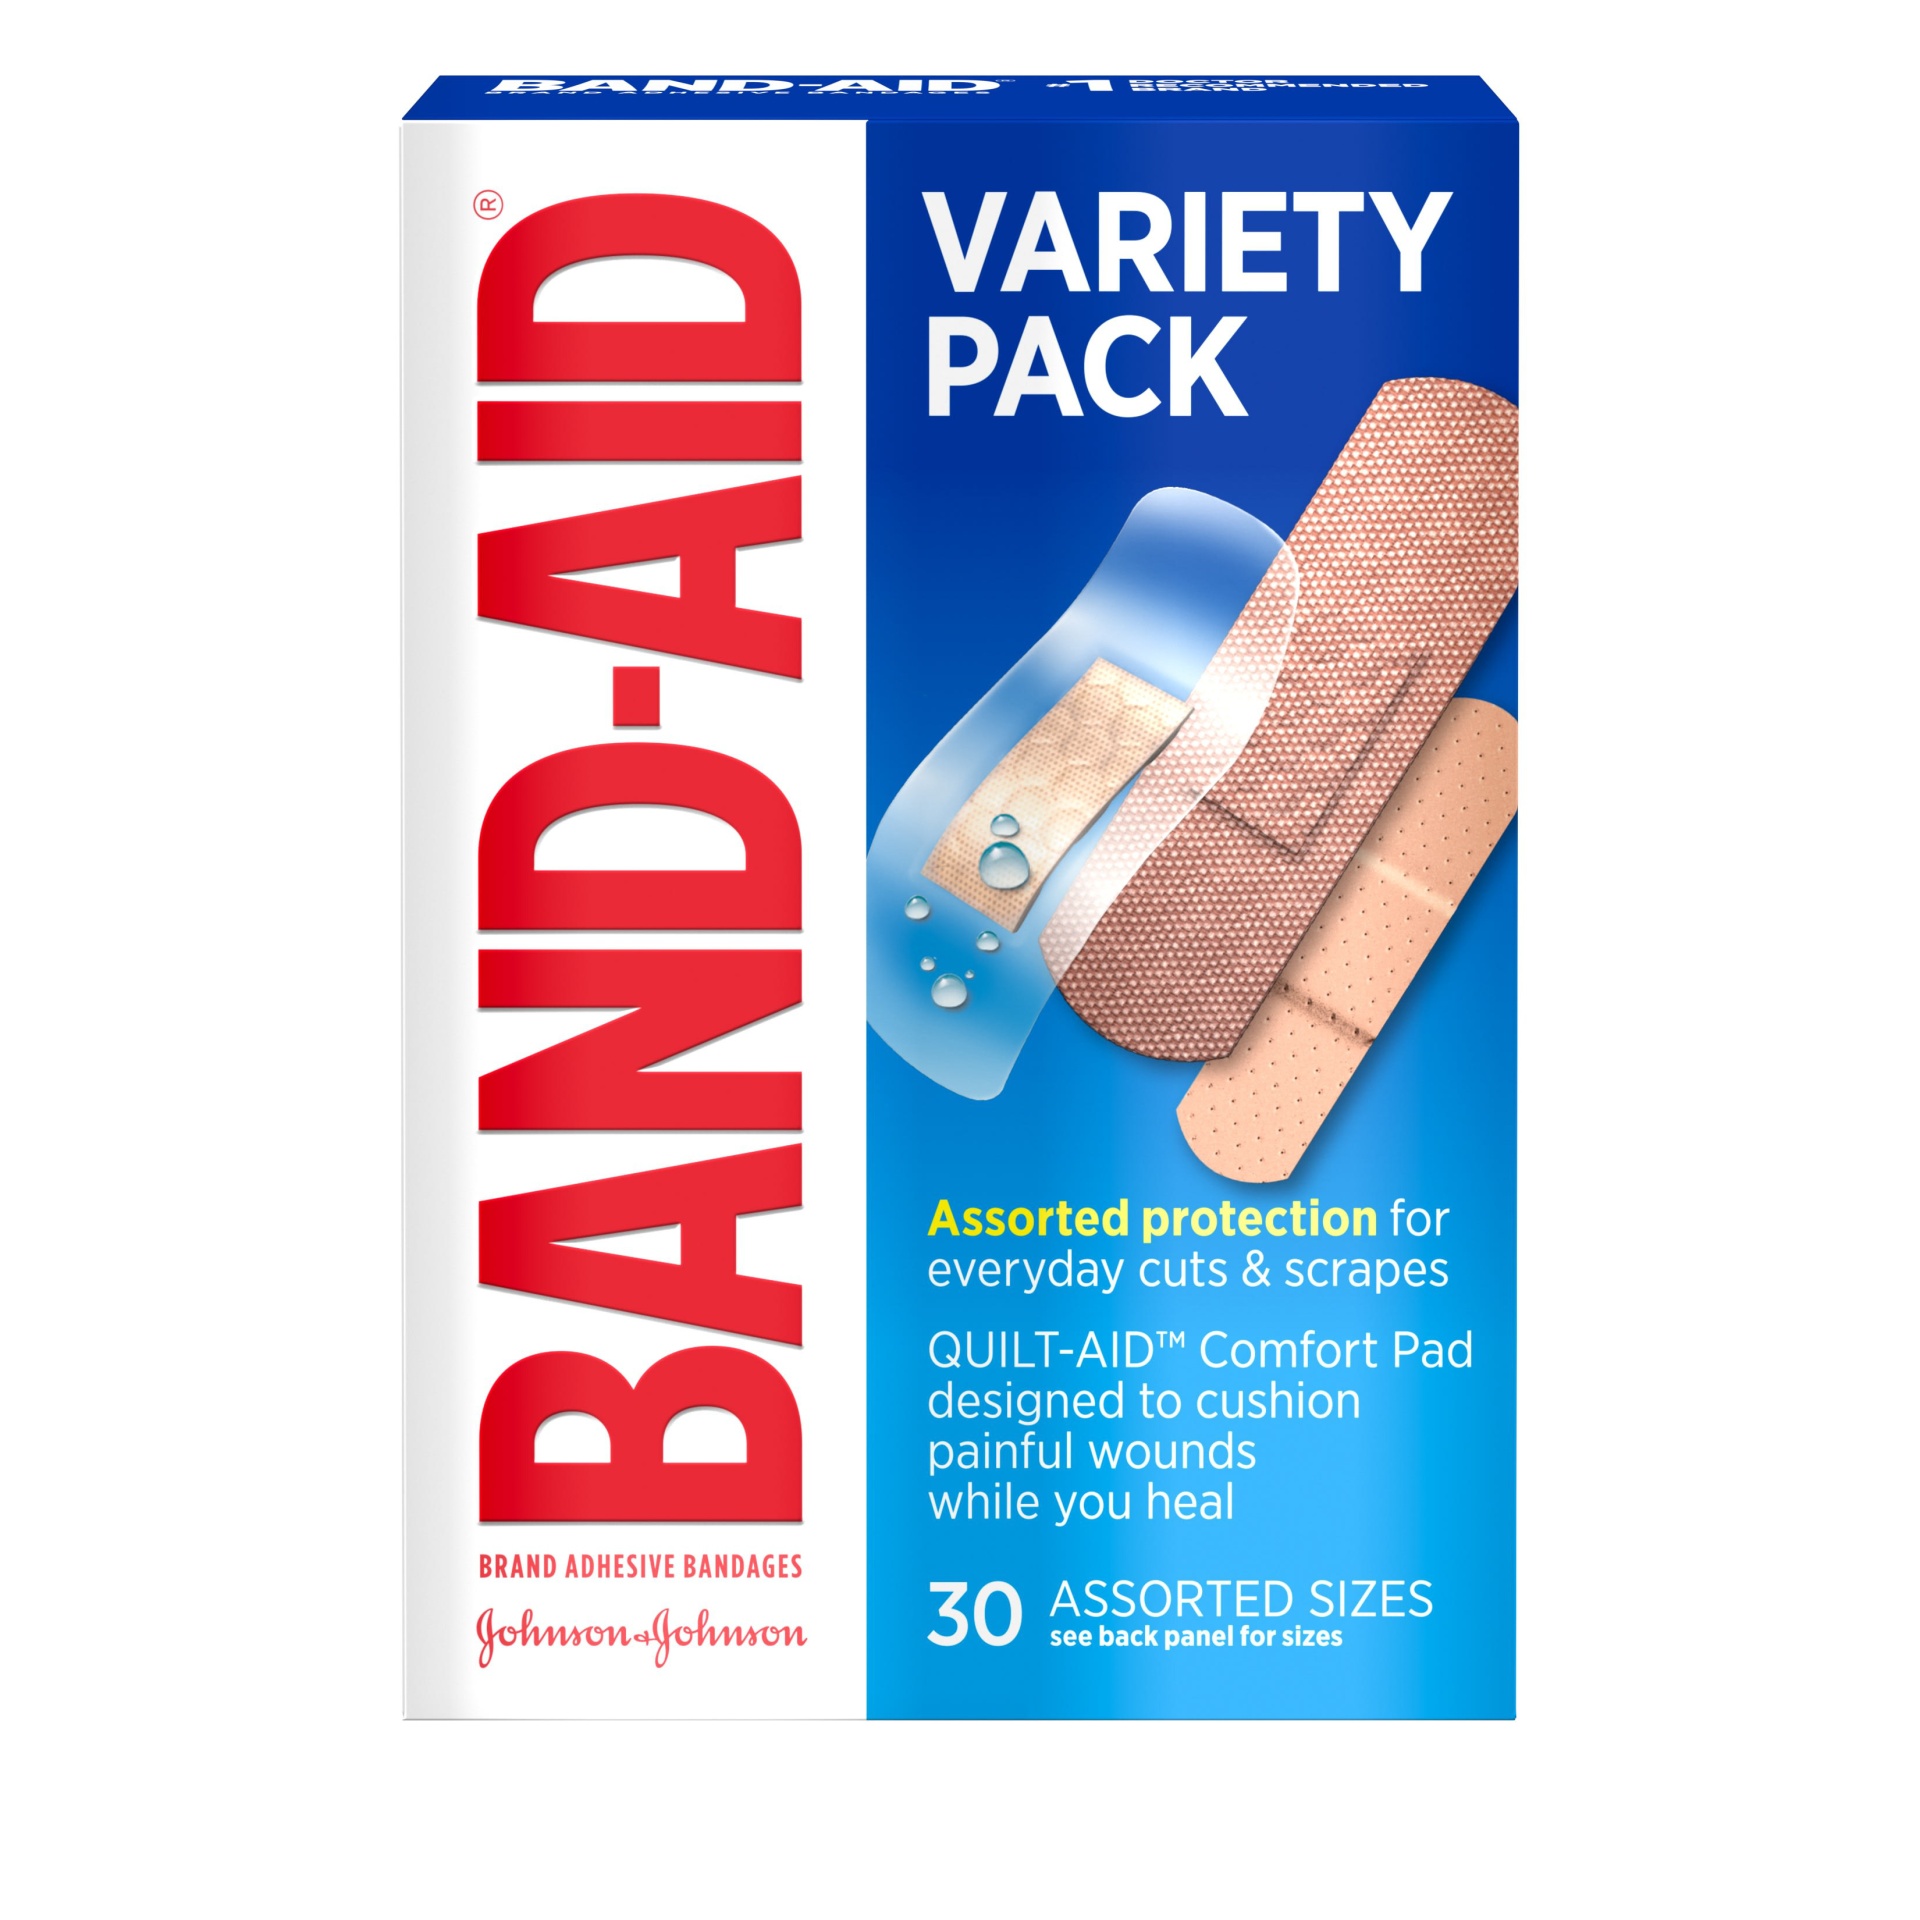 slide 1 of 9, BAND-AID Band-Aid Brand Adhesive Bandages Family Variety Pack, 30 Count, 30 ct